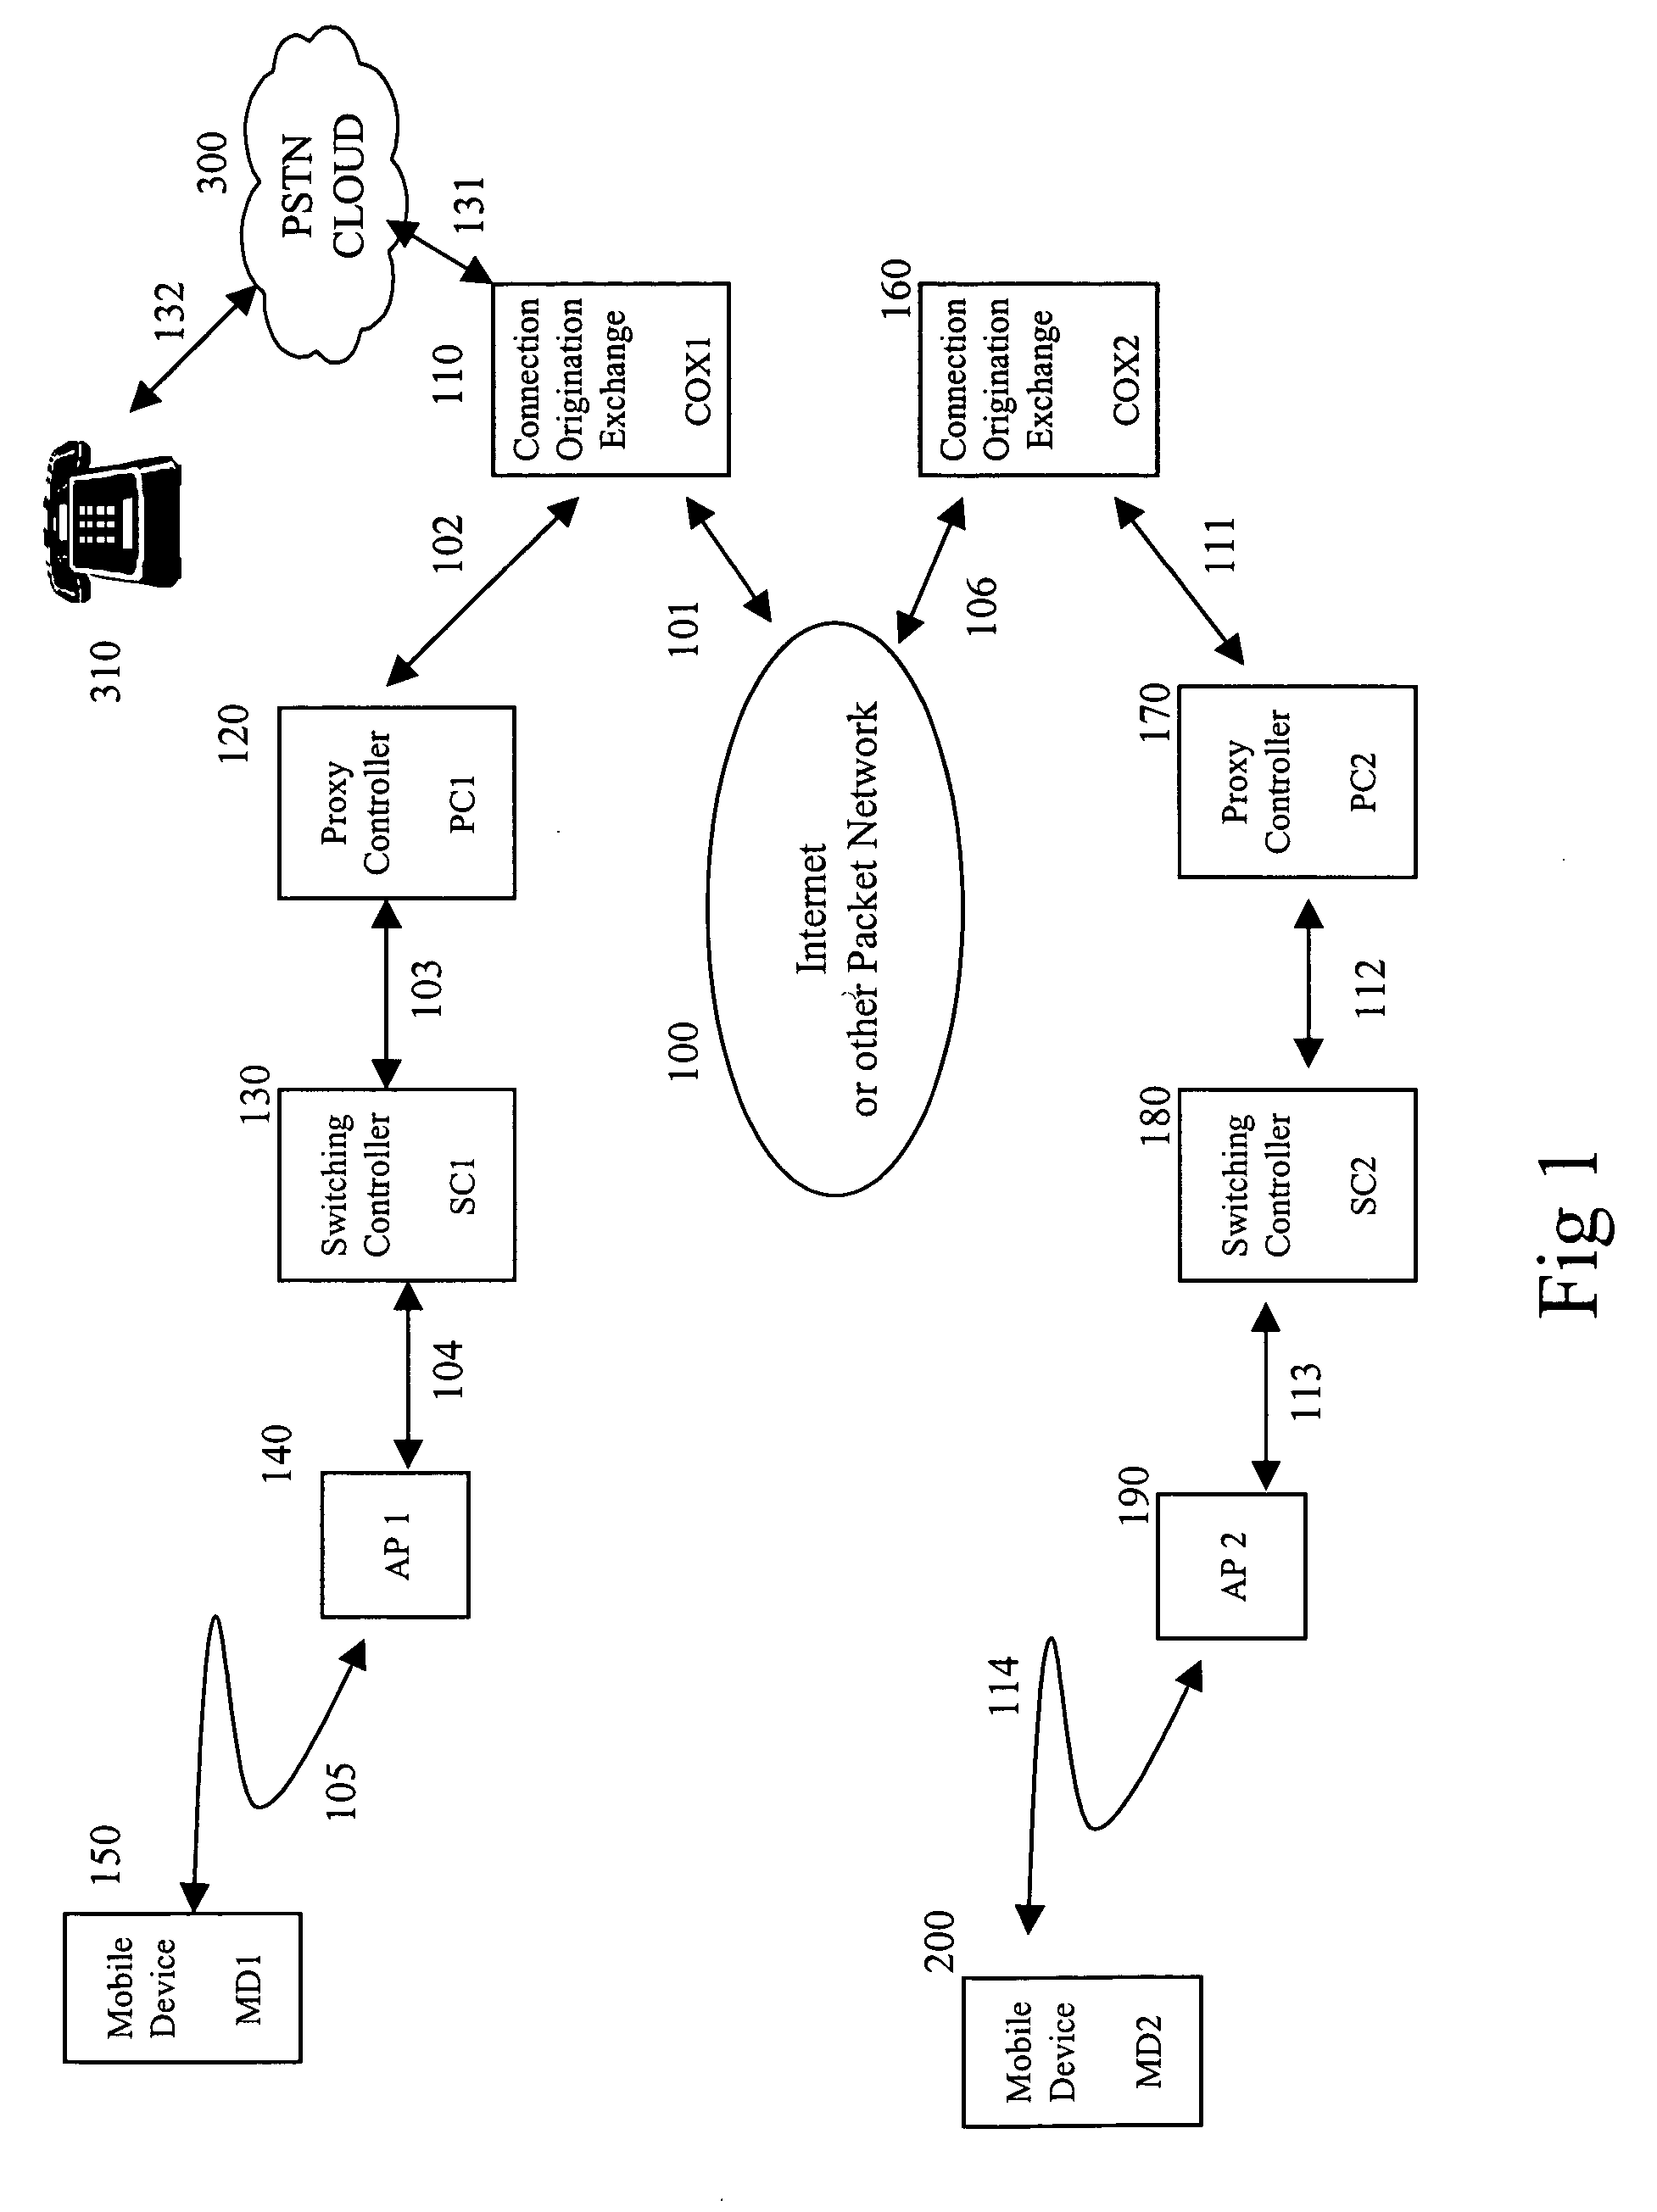 Distributed disparate wireless switching network